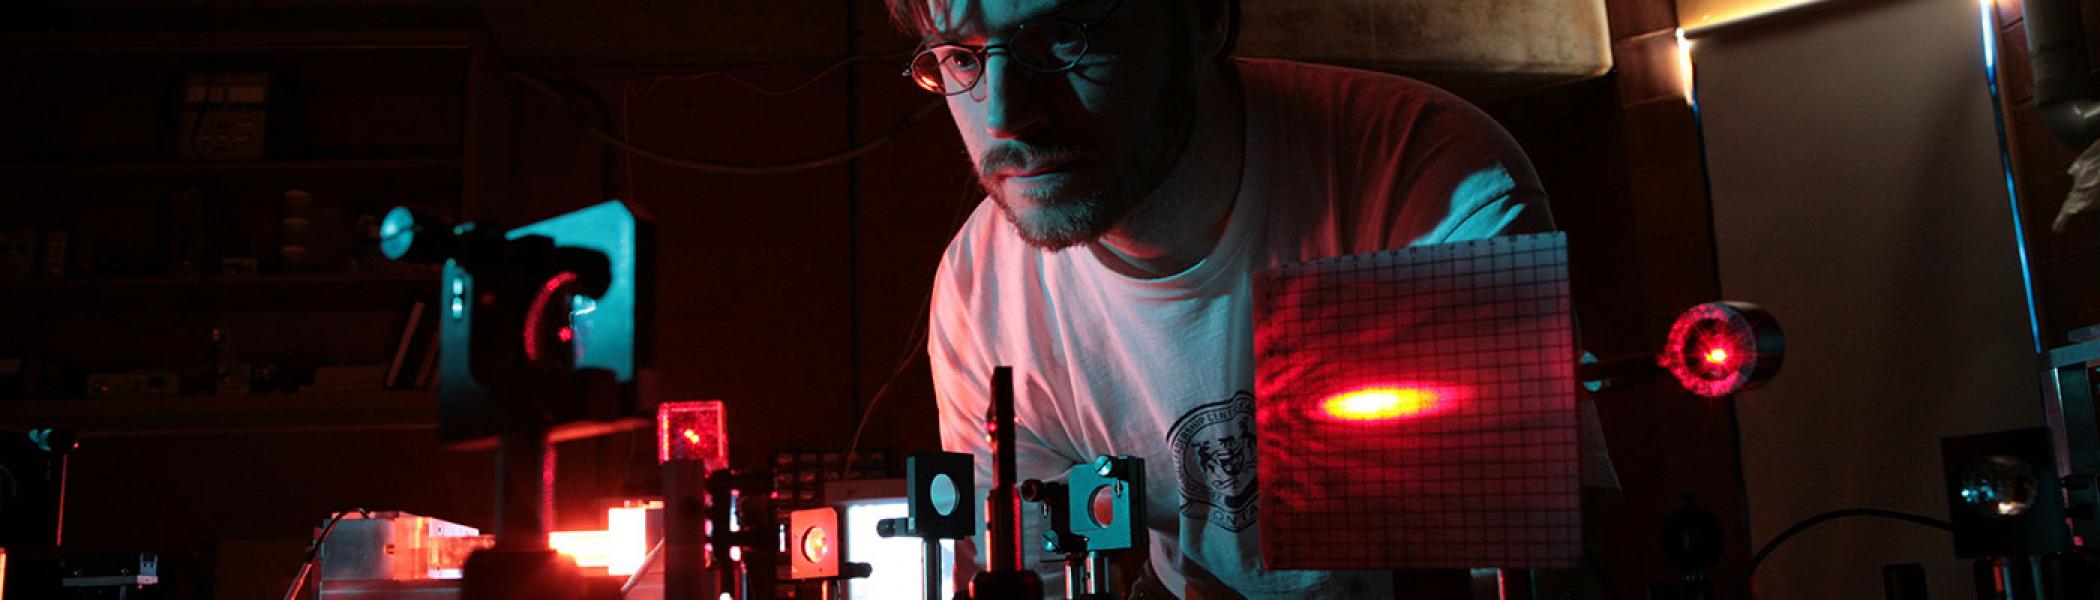 Student using lasers and other instruments in Trent's Centre for Materials Research